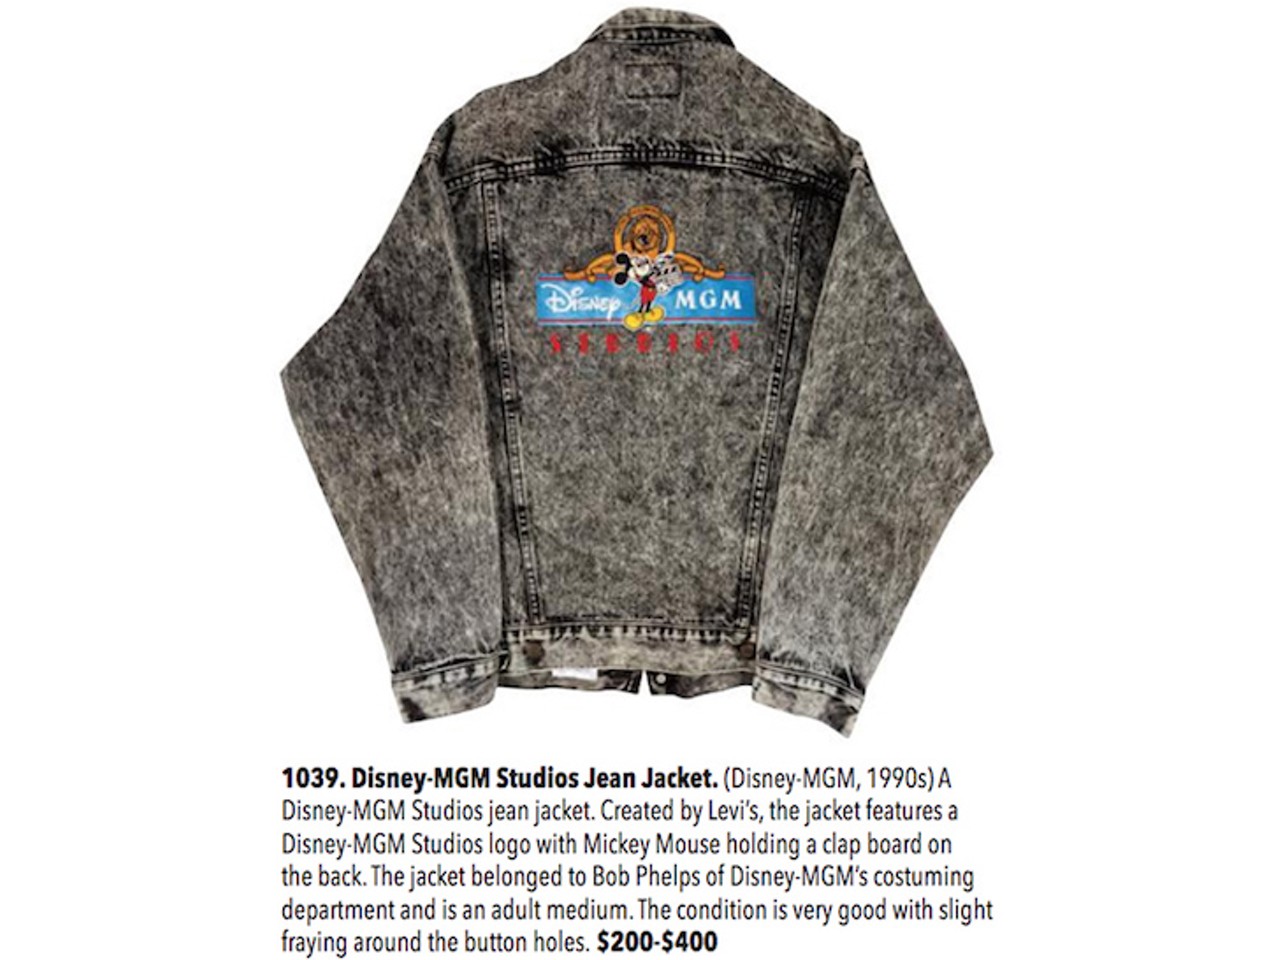 Every item from Walt Disney World up for sale at this weekend's enormous Disneyland auction